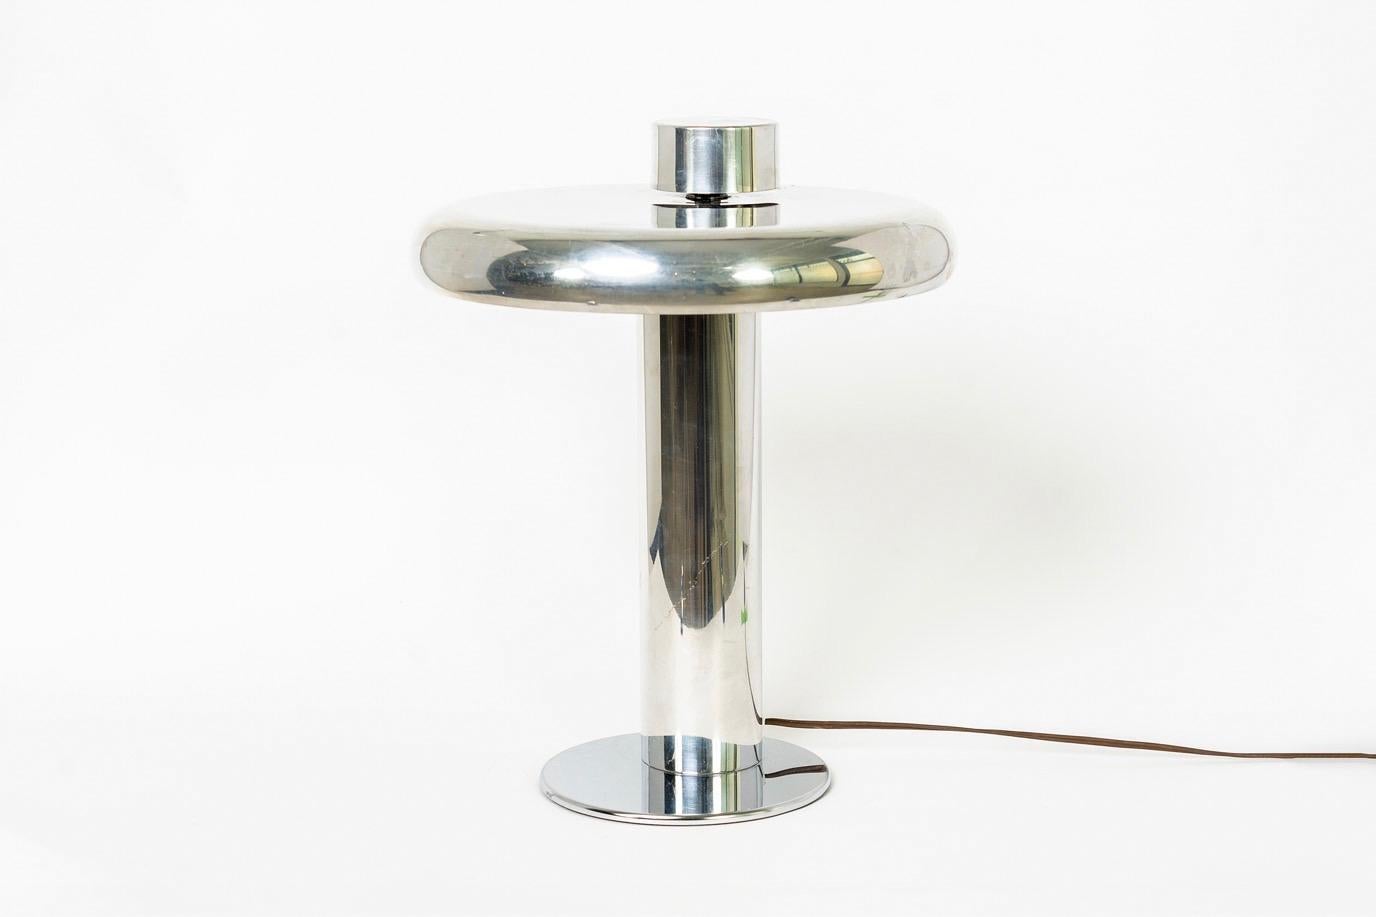 This vintage Mid-Century Modern Robert Sonneman (attributed) table lamp is circa 1970. The clean, modernist design features a circular polished aluminum shade on a tubular steel base. 

Dimensions:
W 12 3/4” x D 12 3/4” x H 16”
Base diameter 7